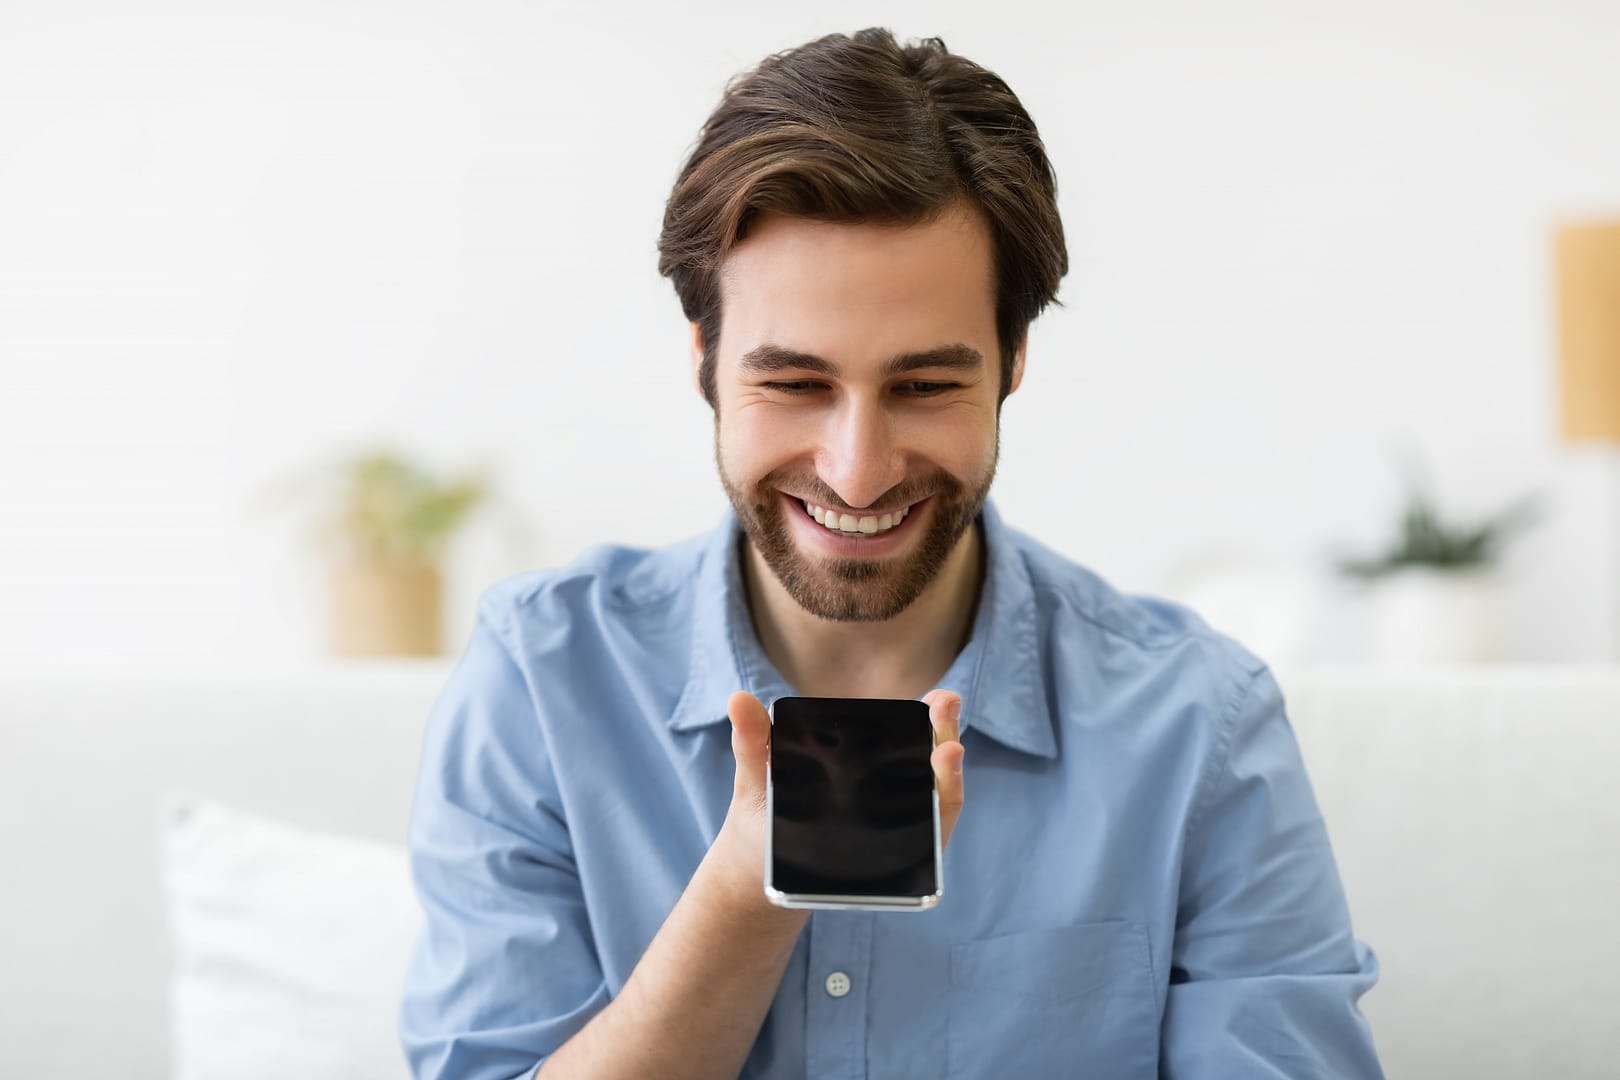 Cheerful Man Using Smartphone With Voice Search Application Sitting Indoor